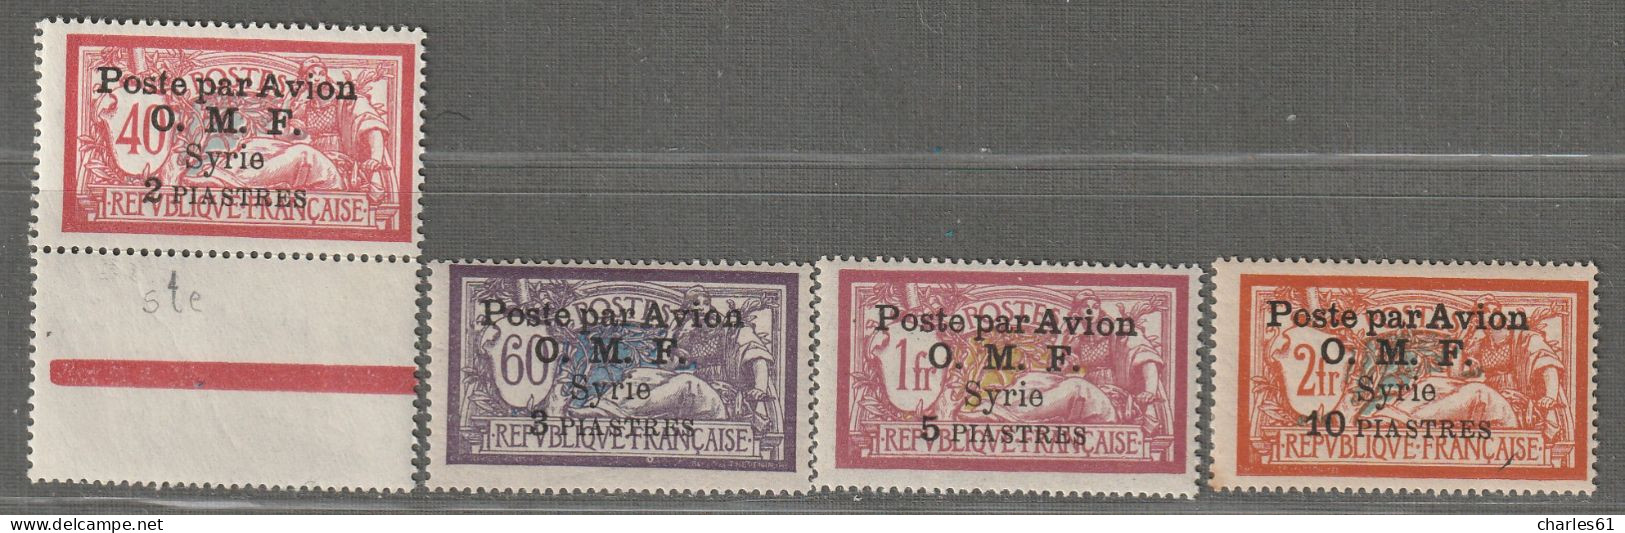 SYRIE - P.A N°10/3 */** (1922) - Luftpost